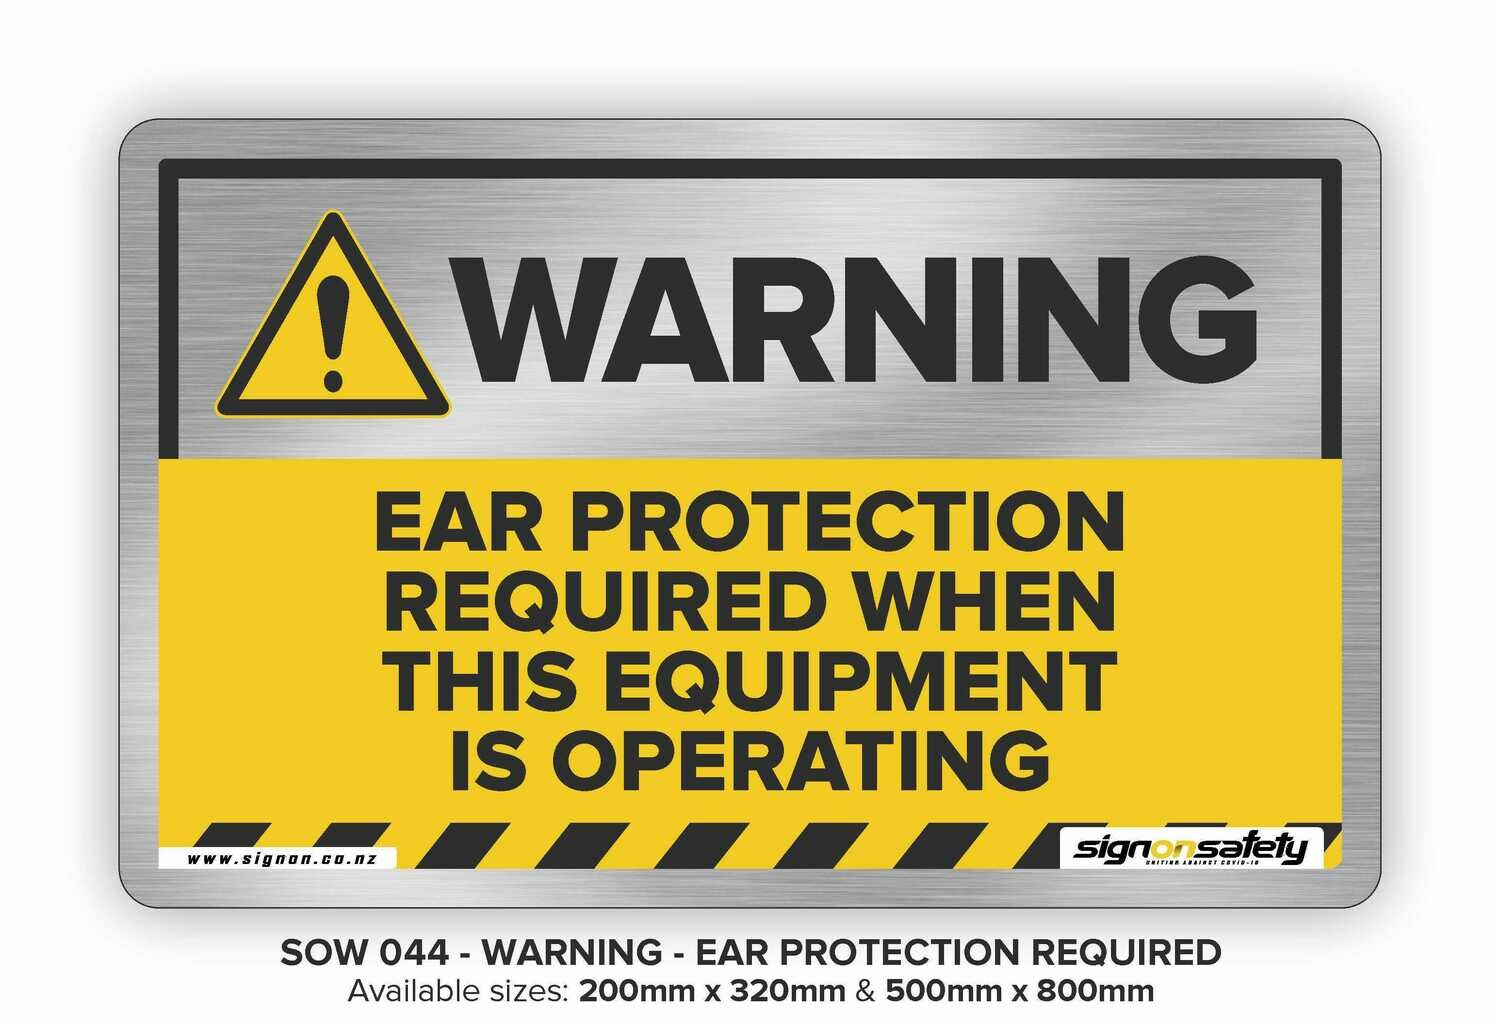 Warning - Ear Protection Required